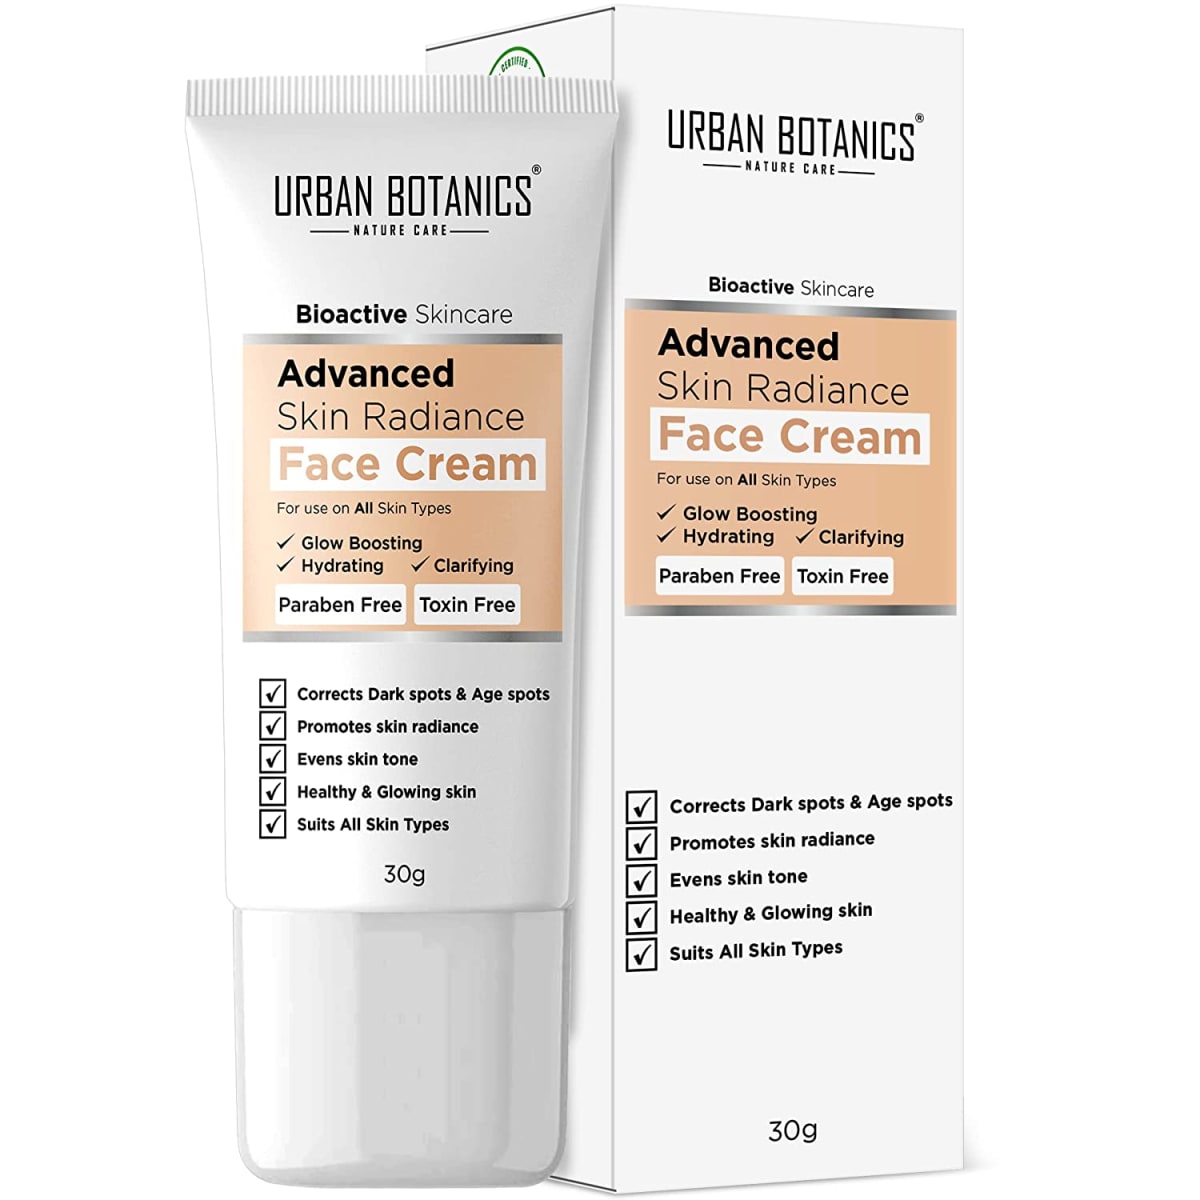 UrbanBotanics Advanced Skin Radiance Face Cream That Helps In Reducing Hyper Pigmentation removal, Dark Spots, Age Spots, Blemishes - 50g